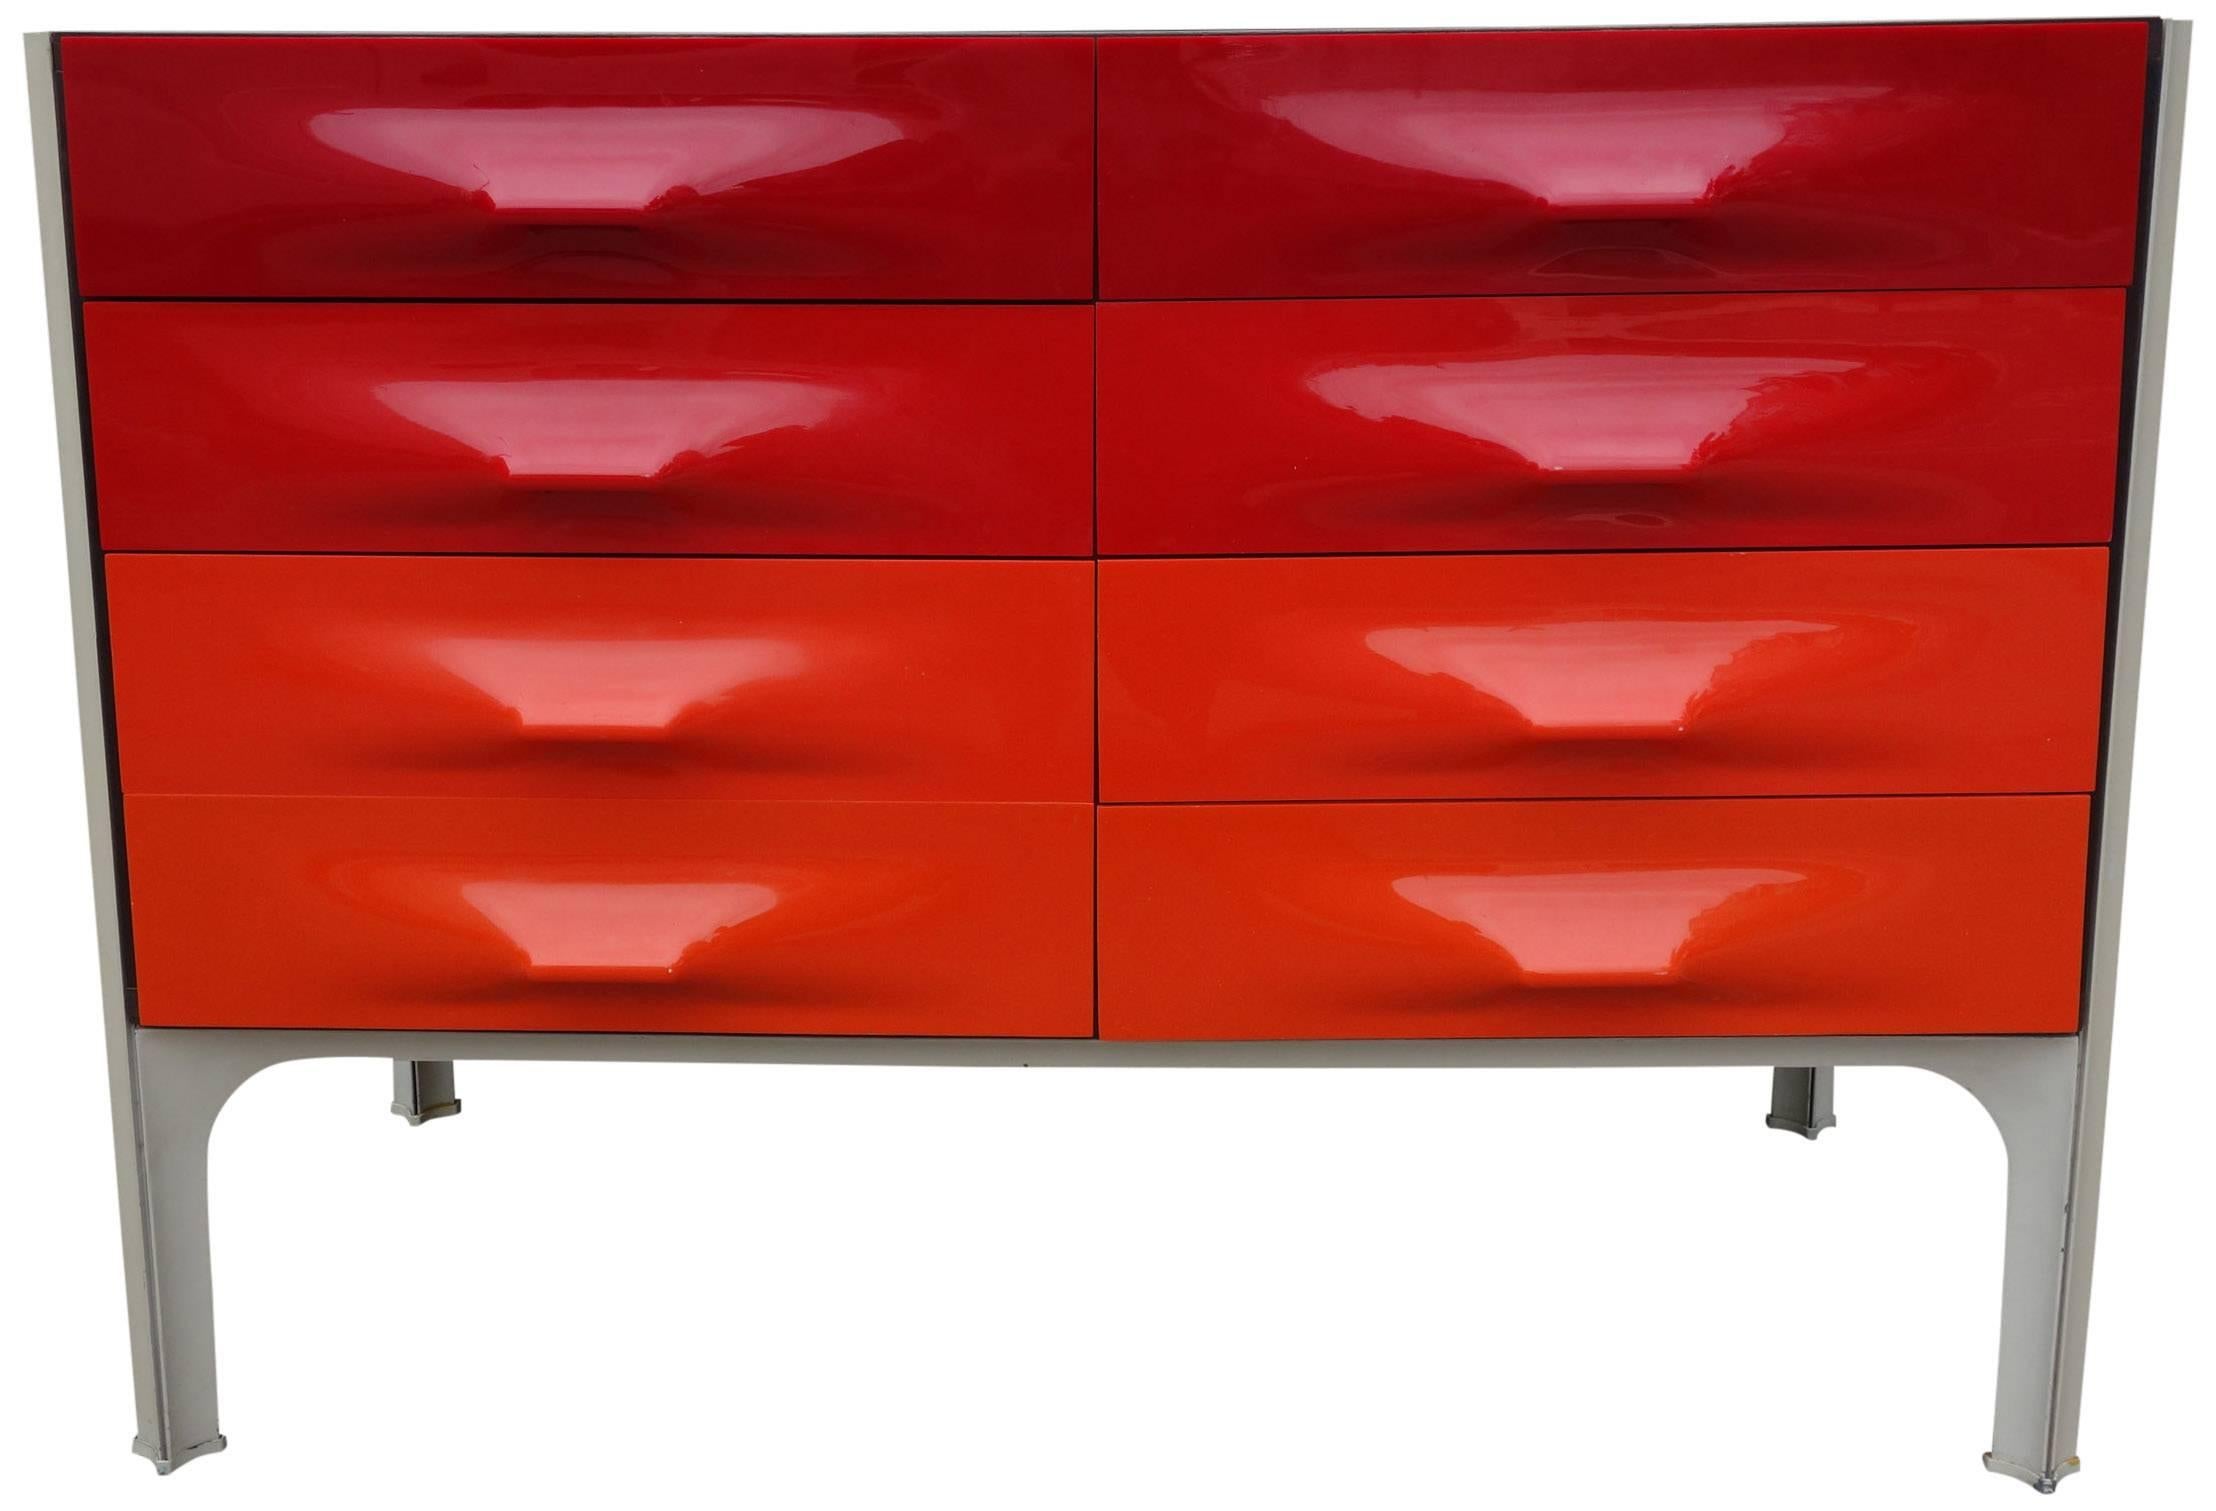 Mid-Century Raymond Loewy DF-2000 dresser for Doubinsky Frères, France in 1969. Hard to find red front. All glides present and front panels showing minimal wear. Excellent example. Look for the double wide version that is also available.